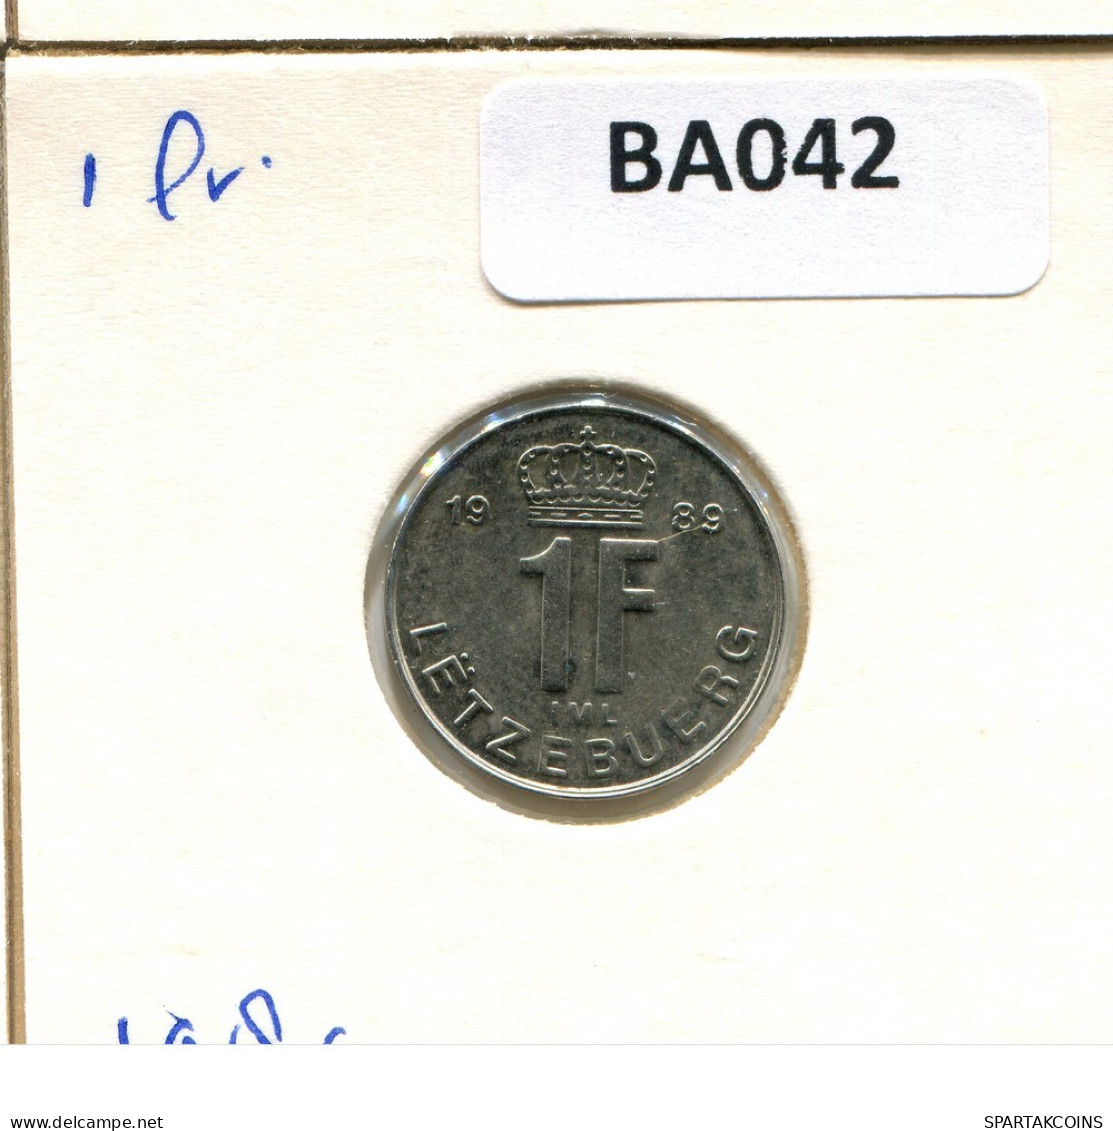 1 FRANC 1989 LUXEMBOURG Coin #BA042.U.A - Luxemburg